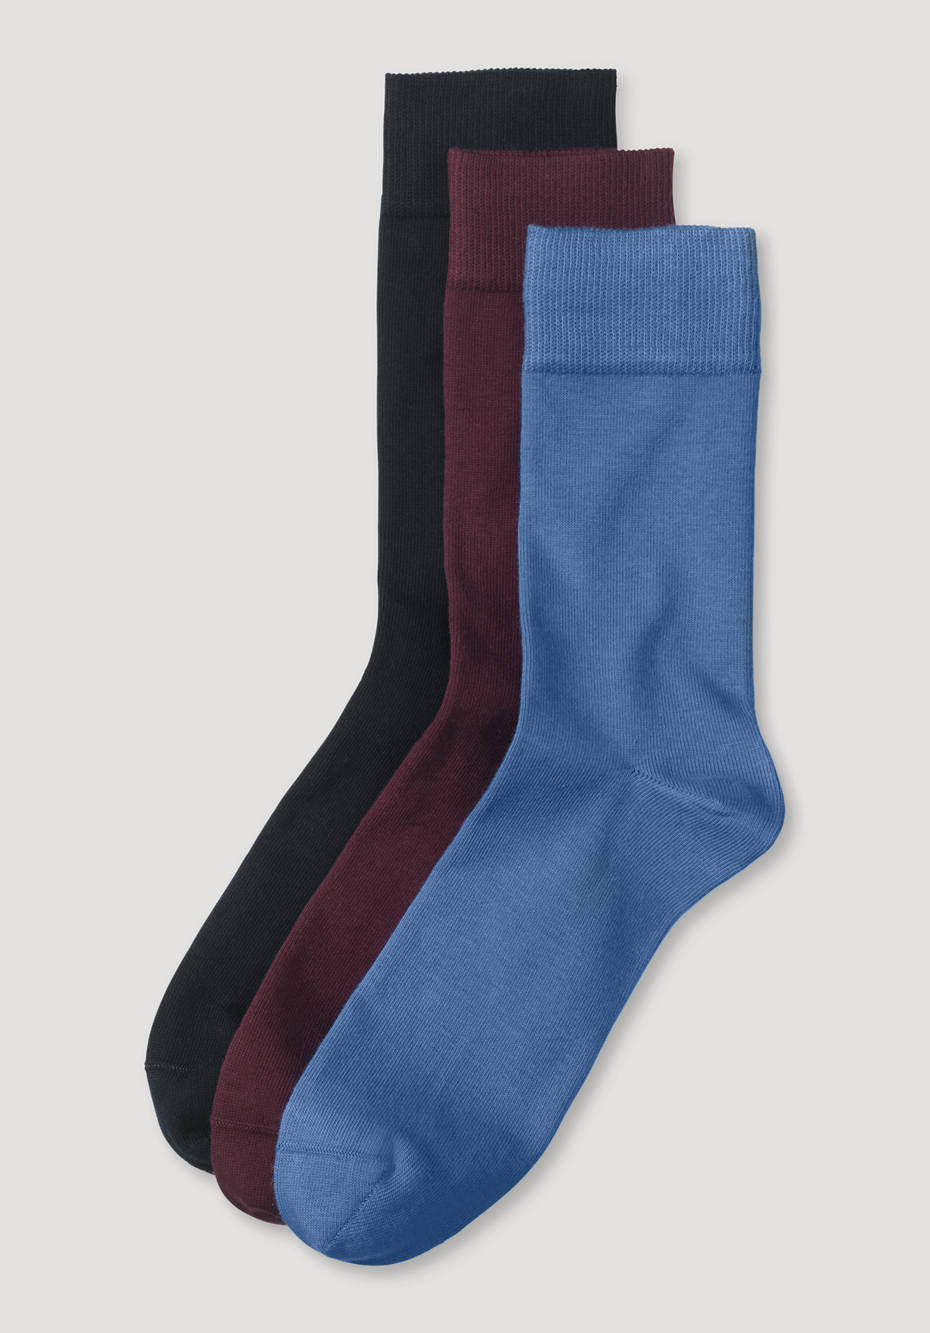 Men's socks in a set of 3 made from organic cotton